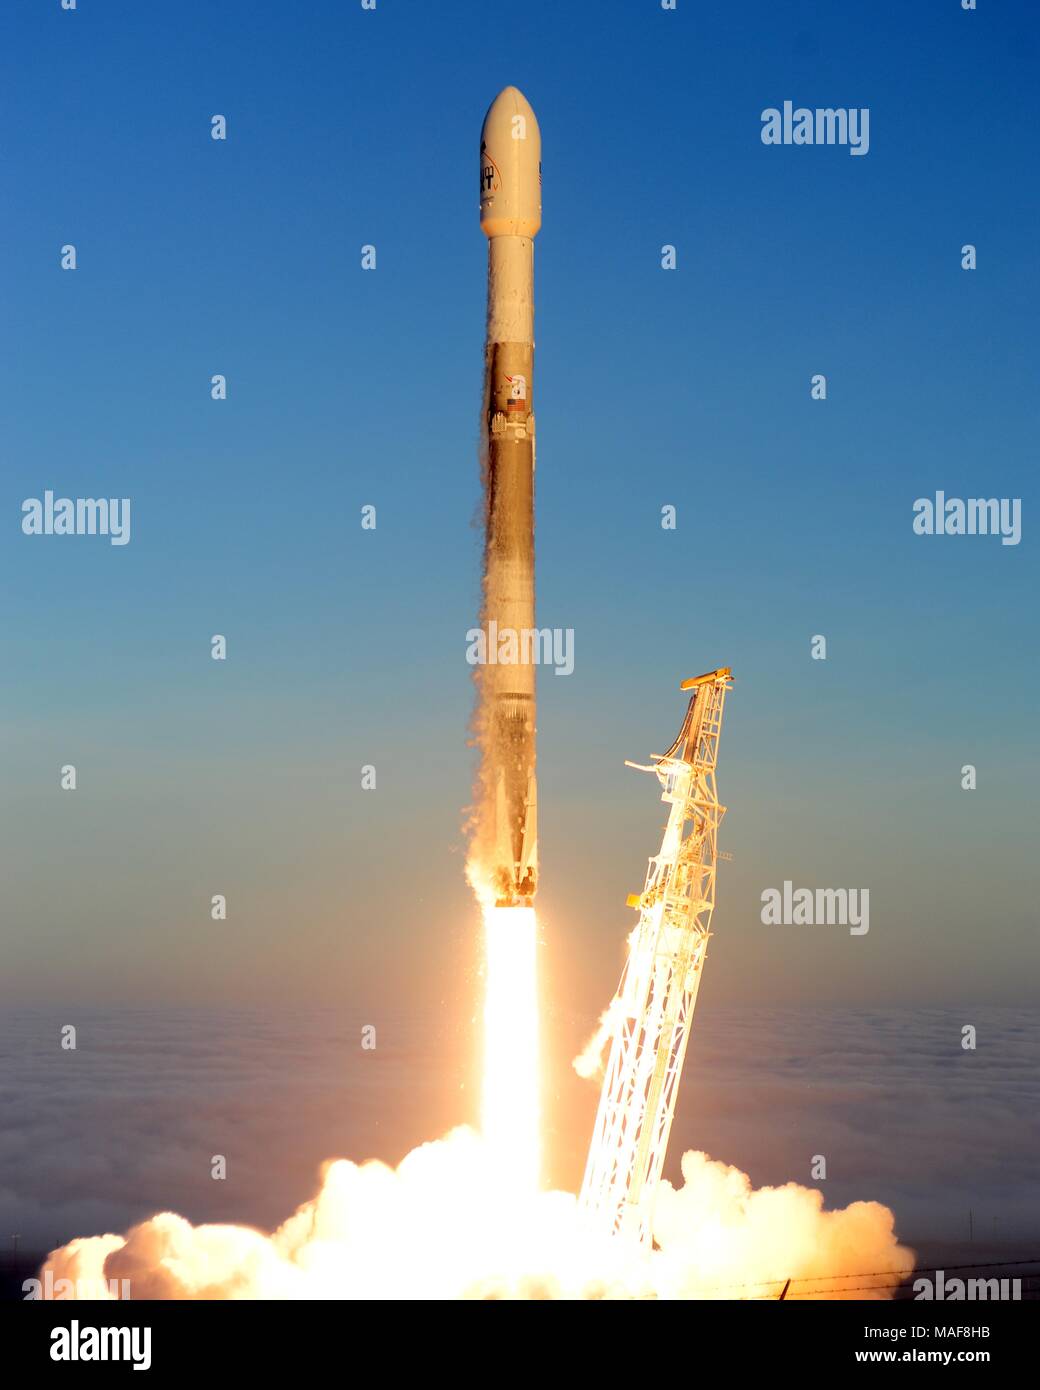 A SpaceX Falcon 9 rocket carrying the Iridium-5 satellite blasting off from Vandenberg Air Force Base March March 30, 2018 in Vandenberg, California. Stock Photo